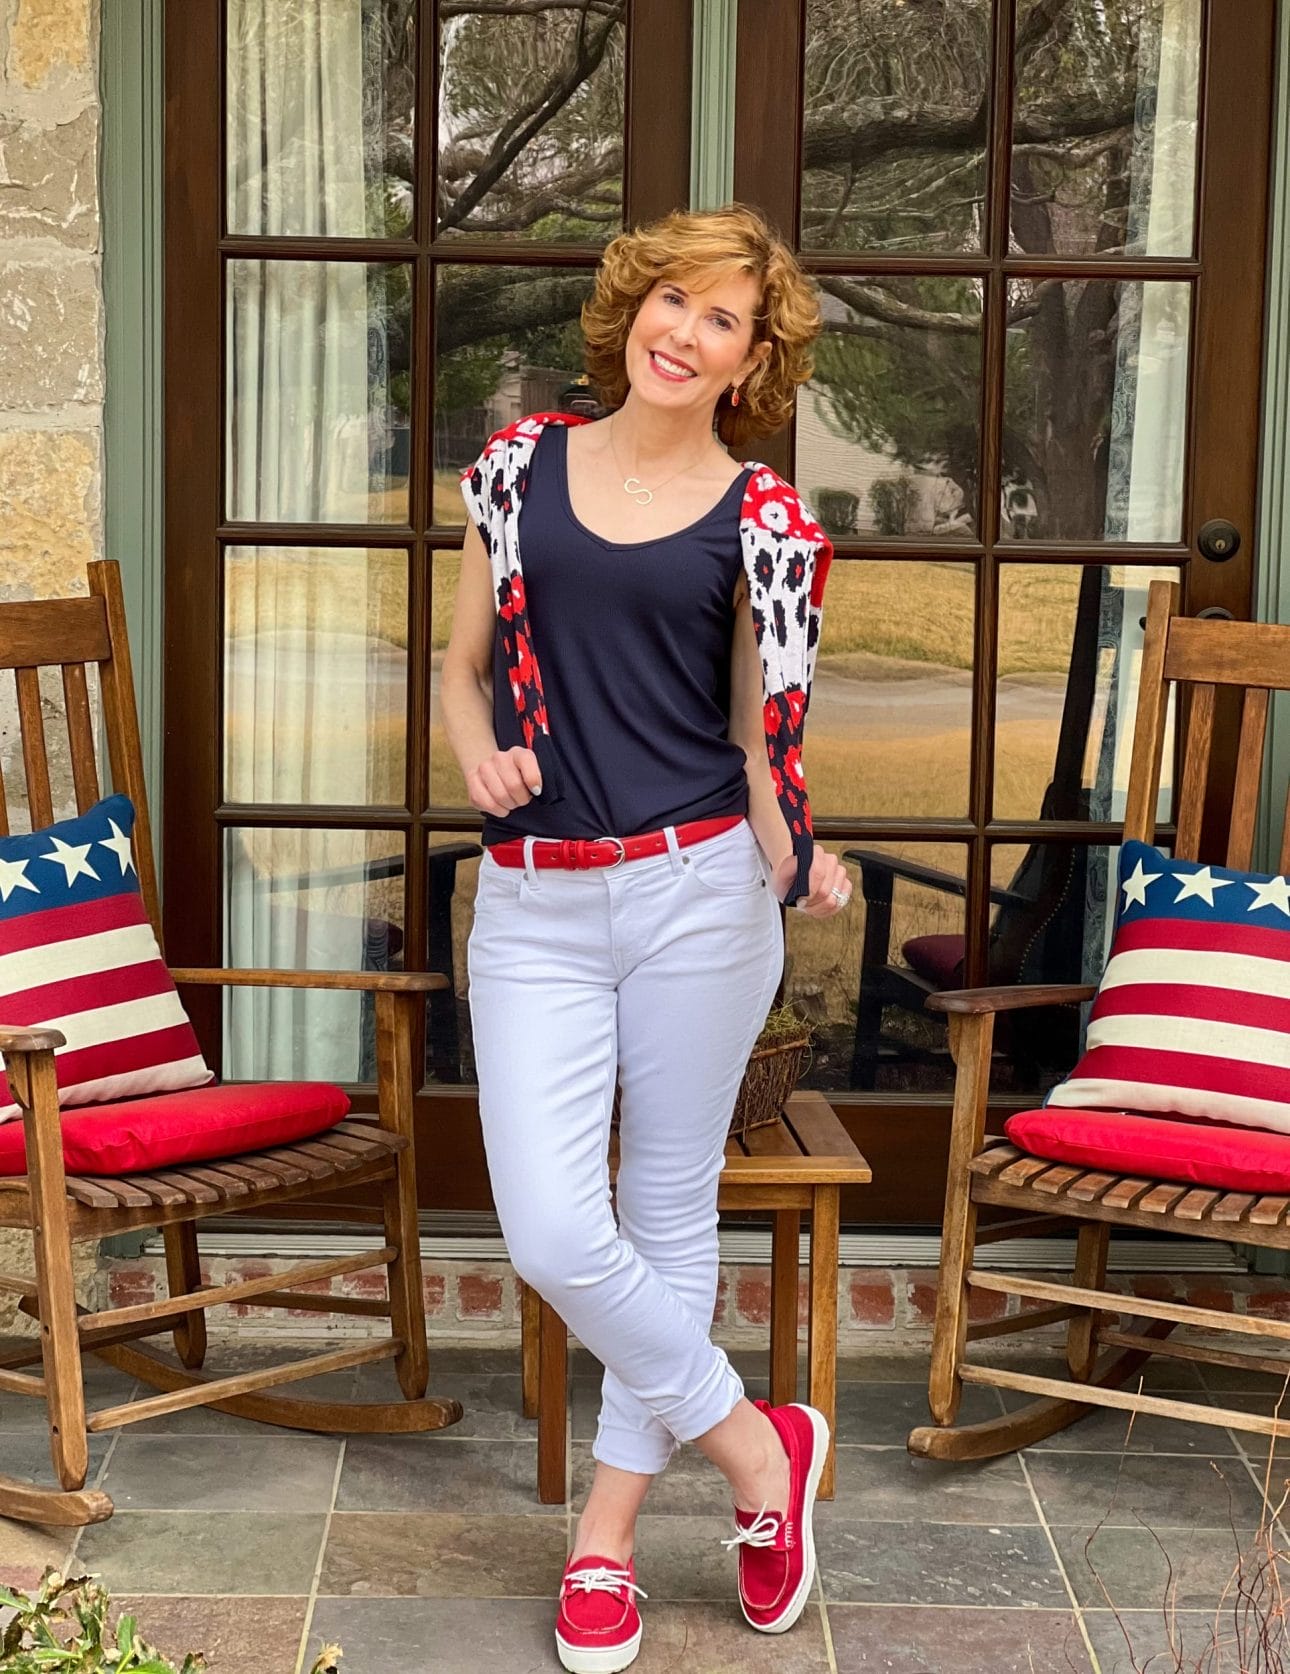 woman over 50 standing on a front porch with rocking chairs and patriotic pillows wearing from the 2022 cabi spring collection including white the skinny jeans, navy blue busy tank, and the upbeat cardigan on her shoulders with sleeves hanging down in front of her chest